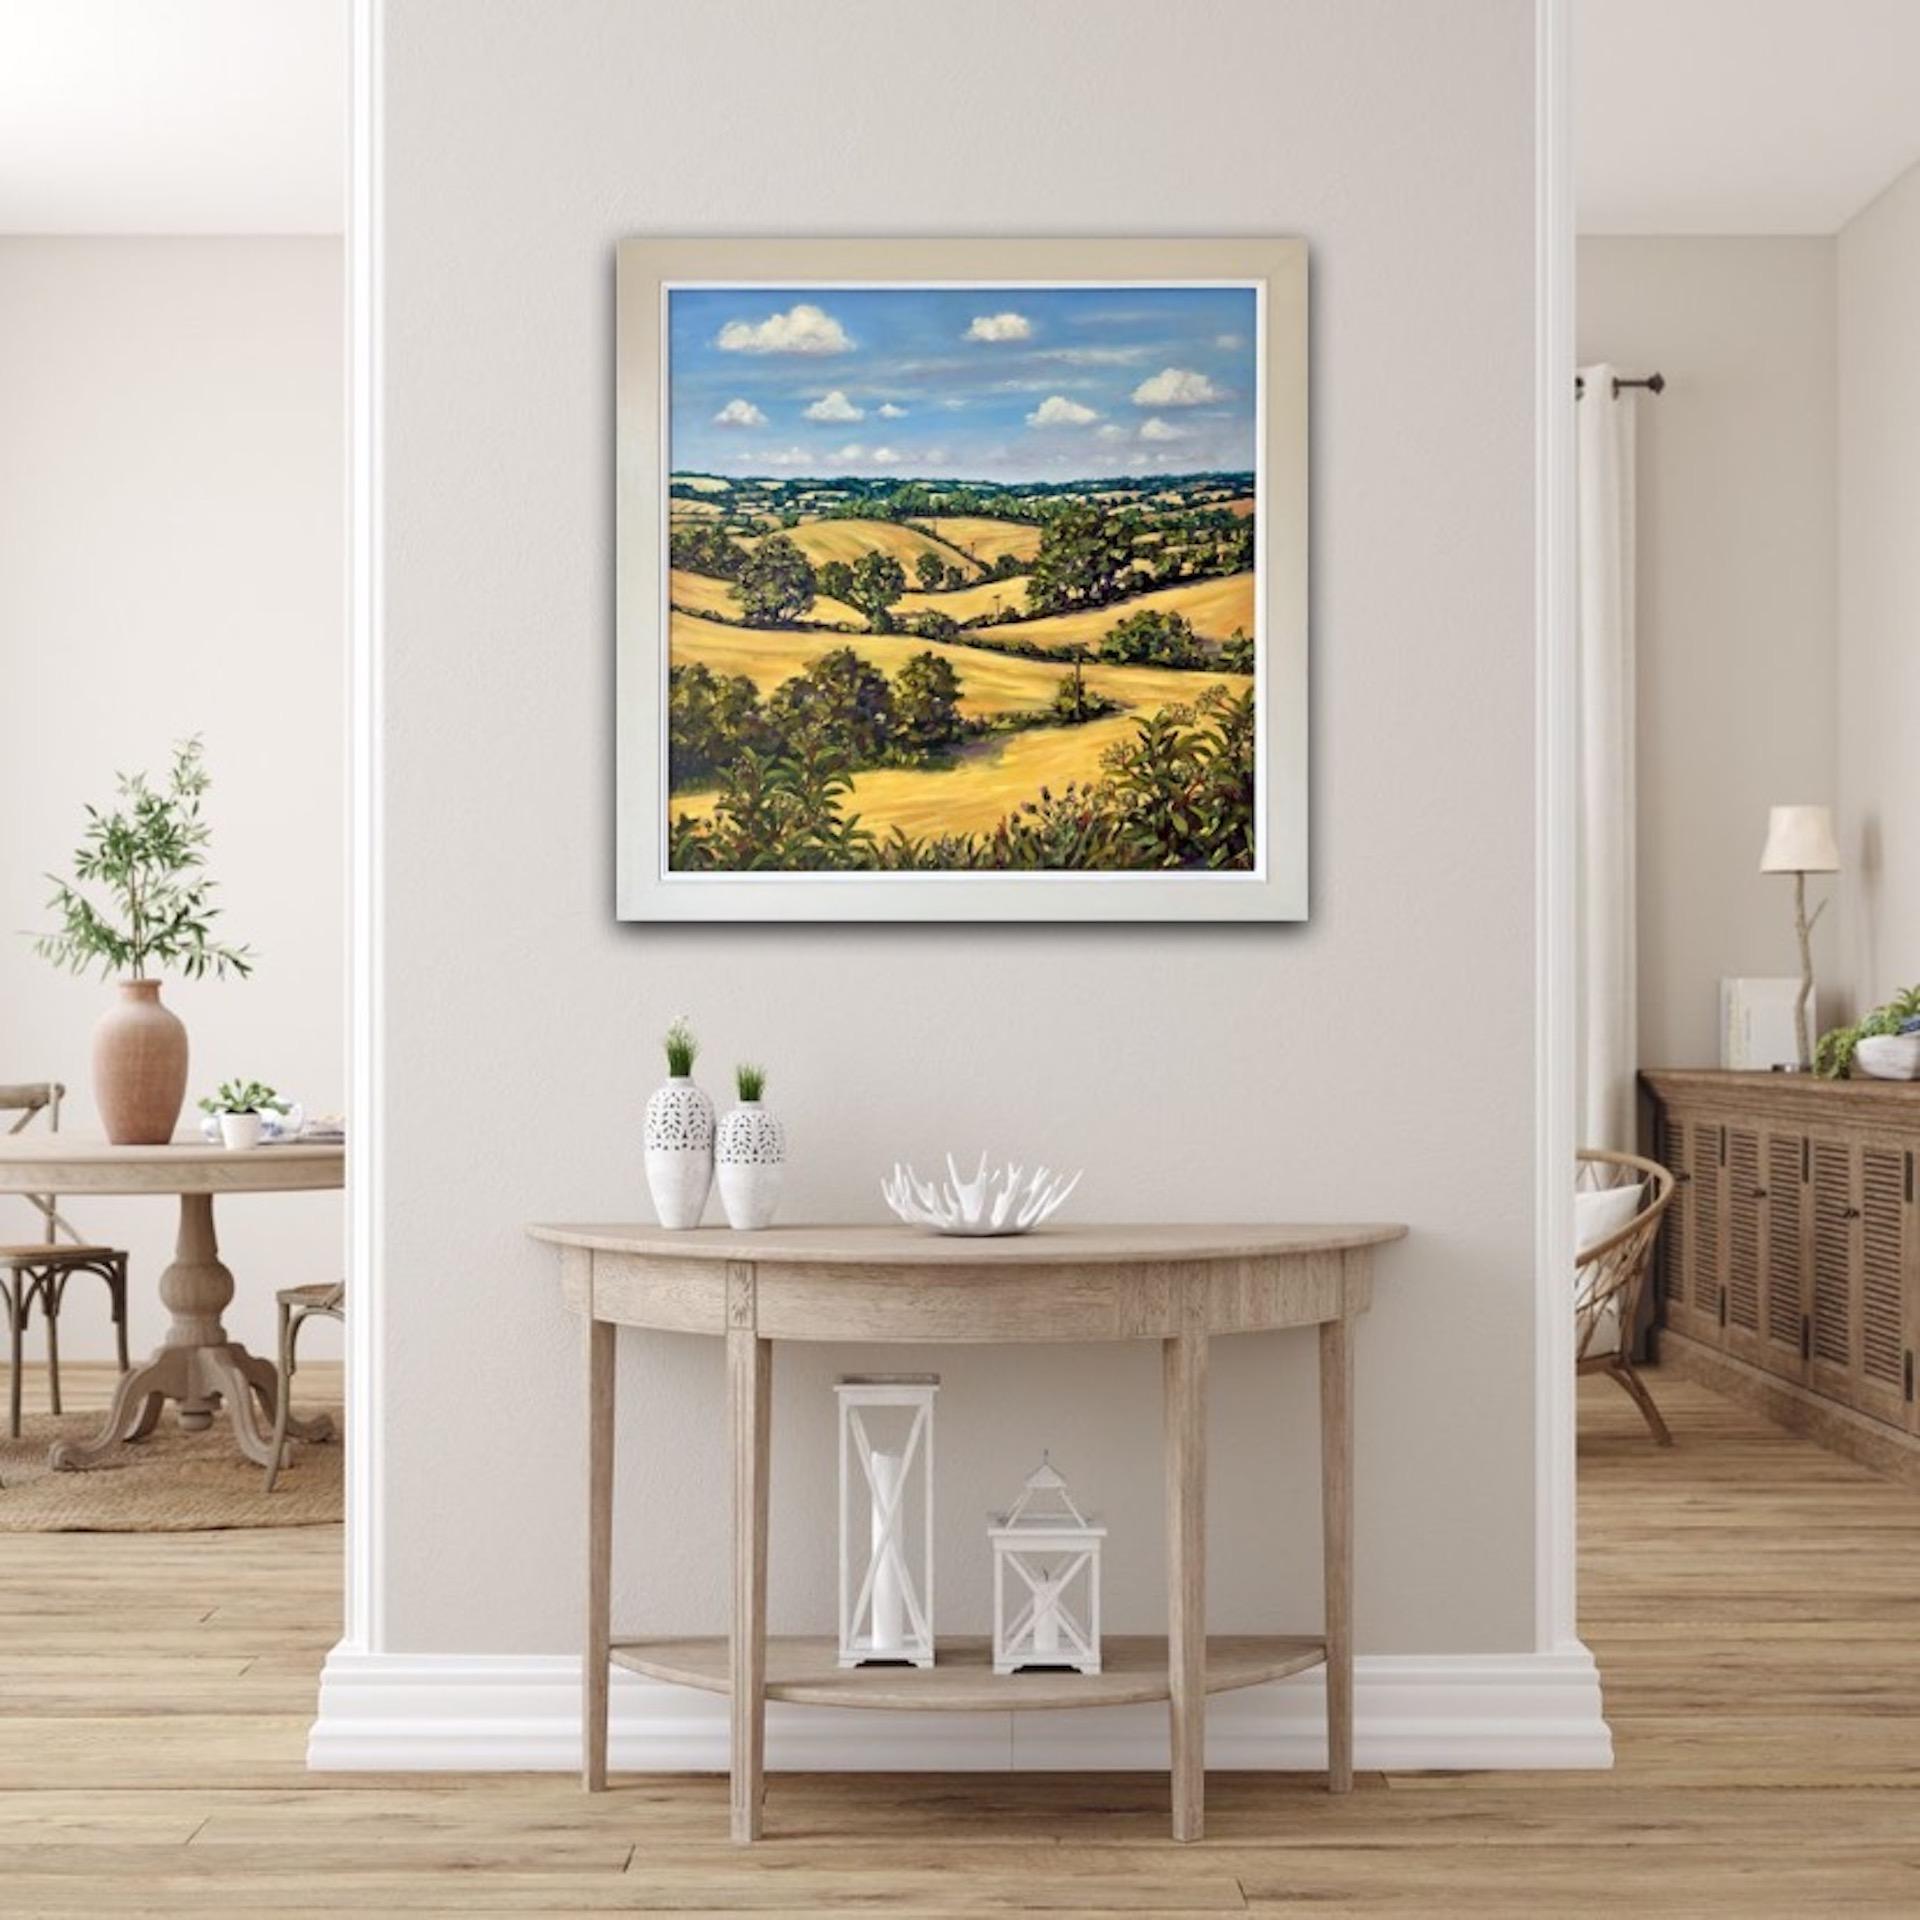 Marie Robinson
August Fields
Original Landscape Painting
Oil Paint on Canvas Board
Board Size: H 60cm x W 60cm x D 0.5cm
Framed Size: H 69cm x W 69cm x D 2cm
Sold Framed in a soft off white Painted Wood Frame
Please note that insitu images are